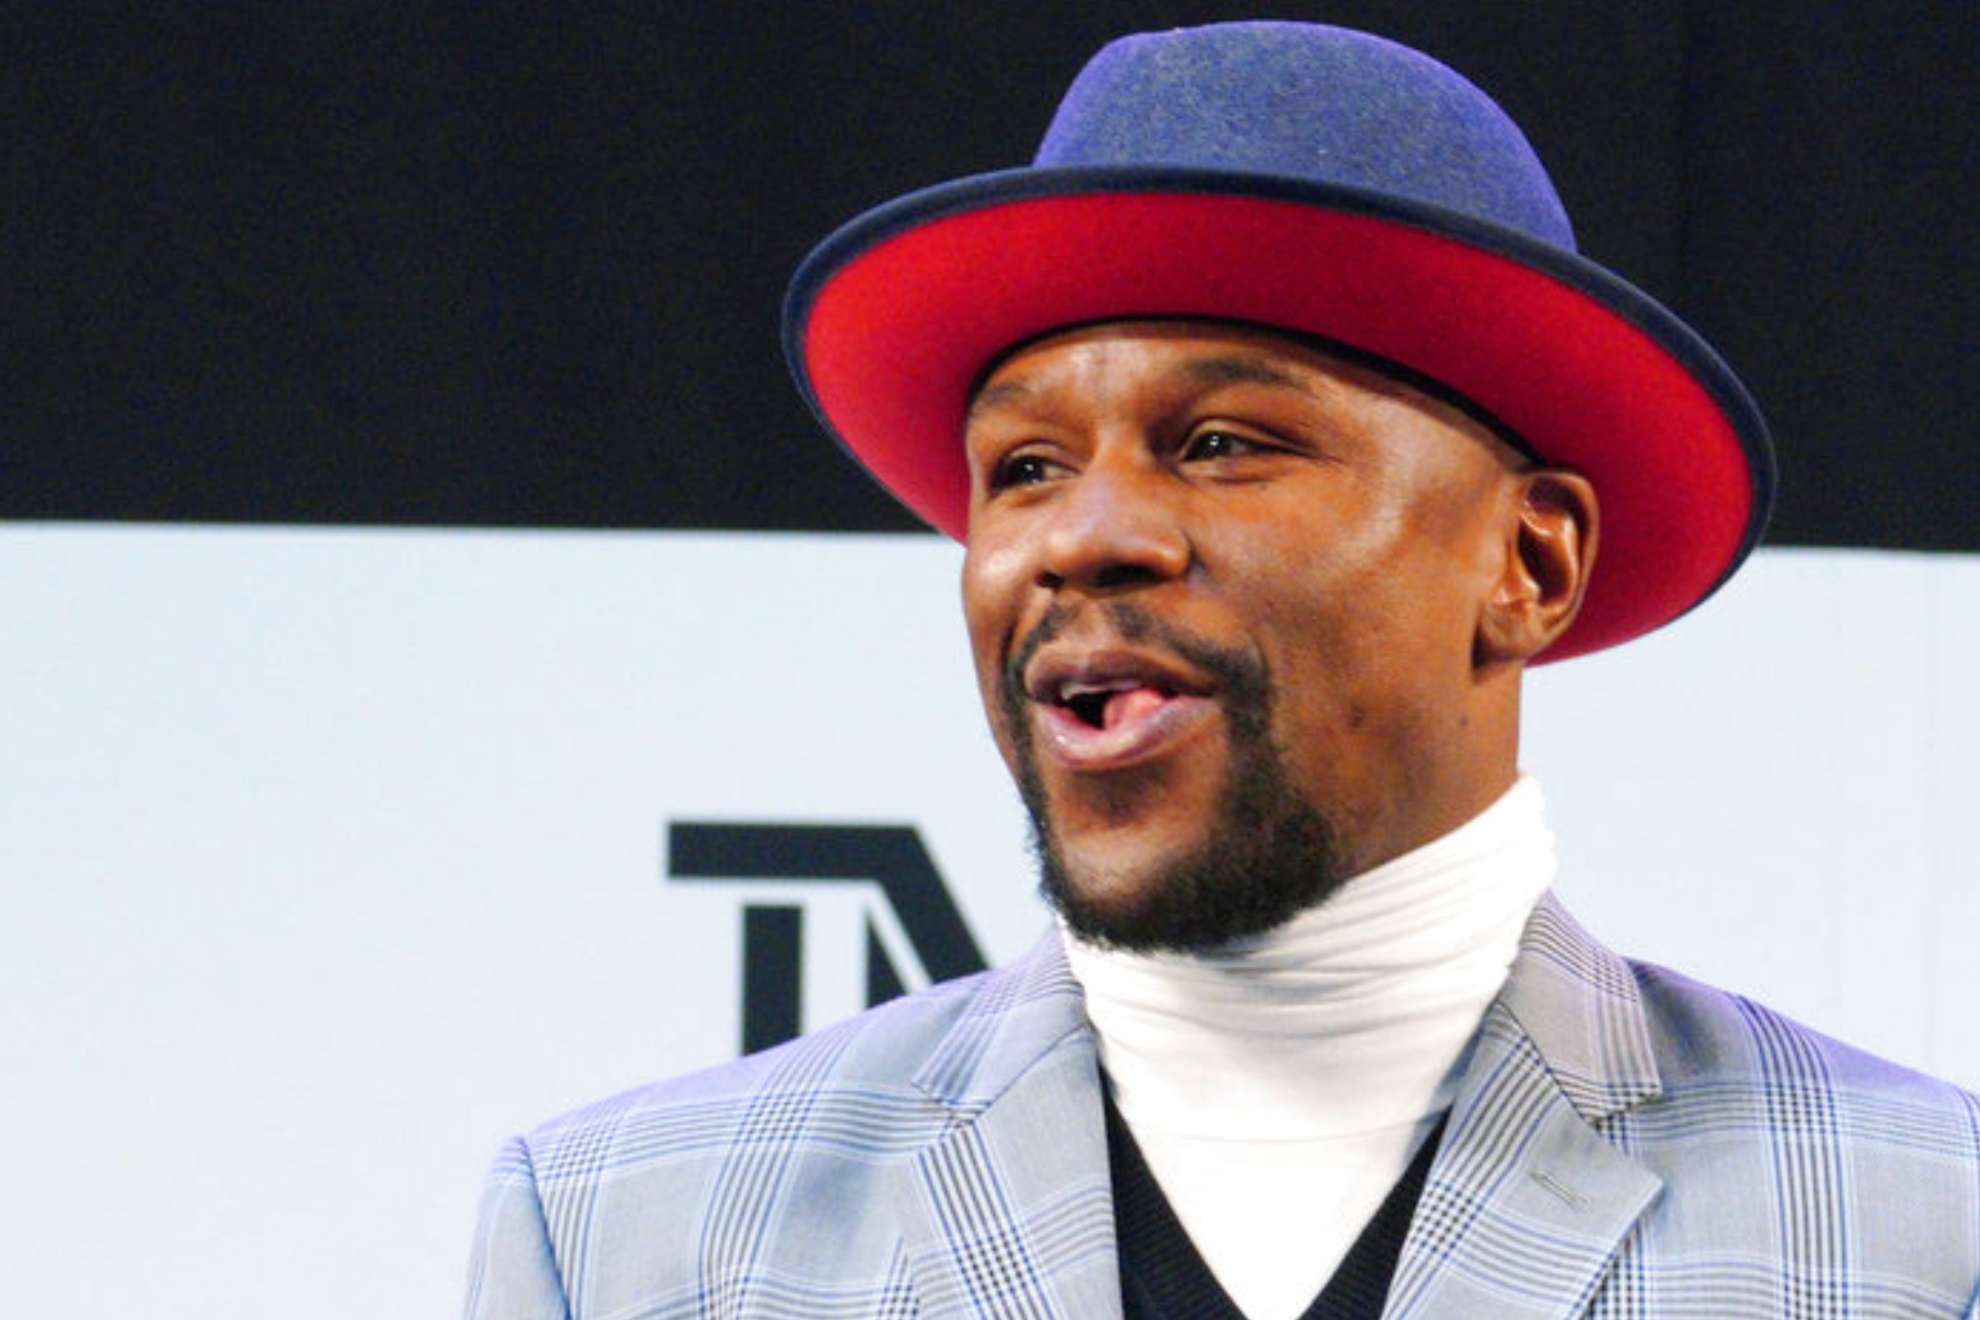 Floyd Mayweather is considered one of the best boxers of all time